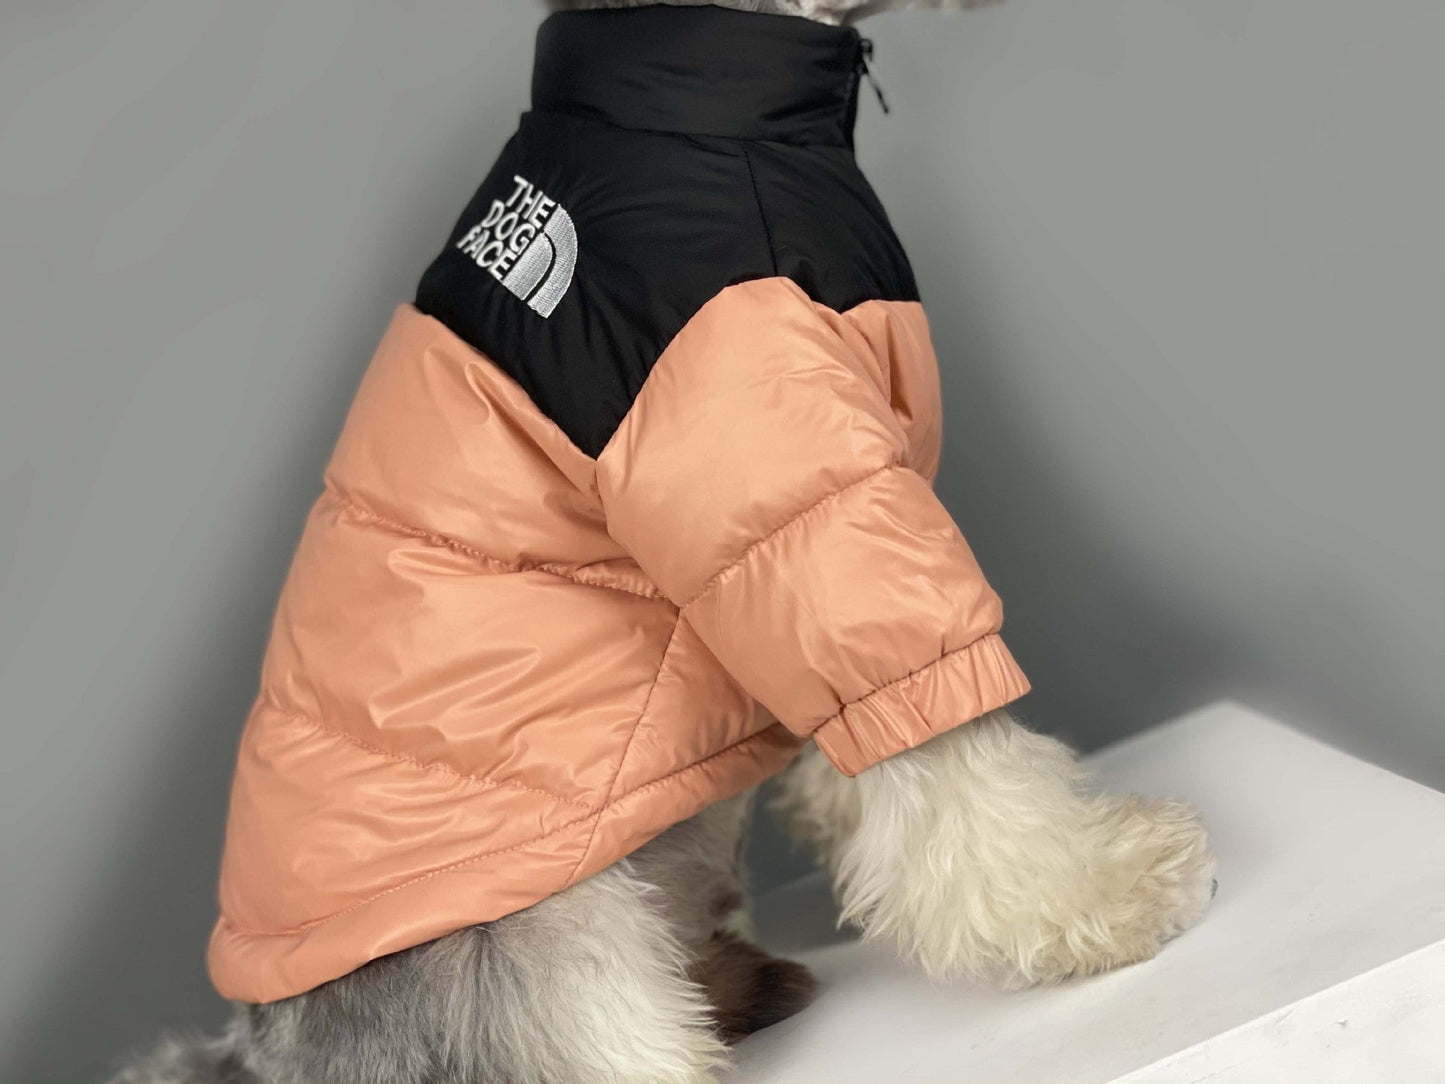 The DogFace™ Puffer Jacket